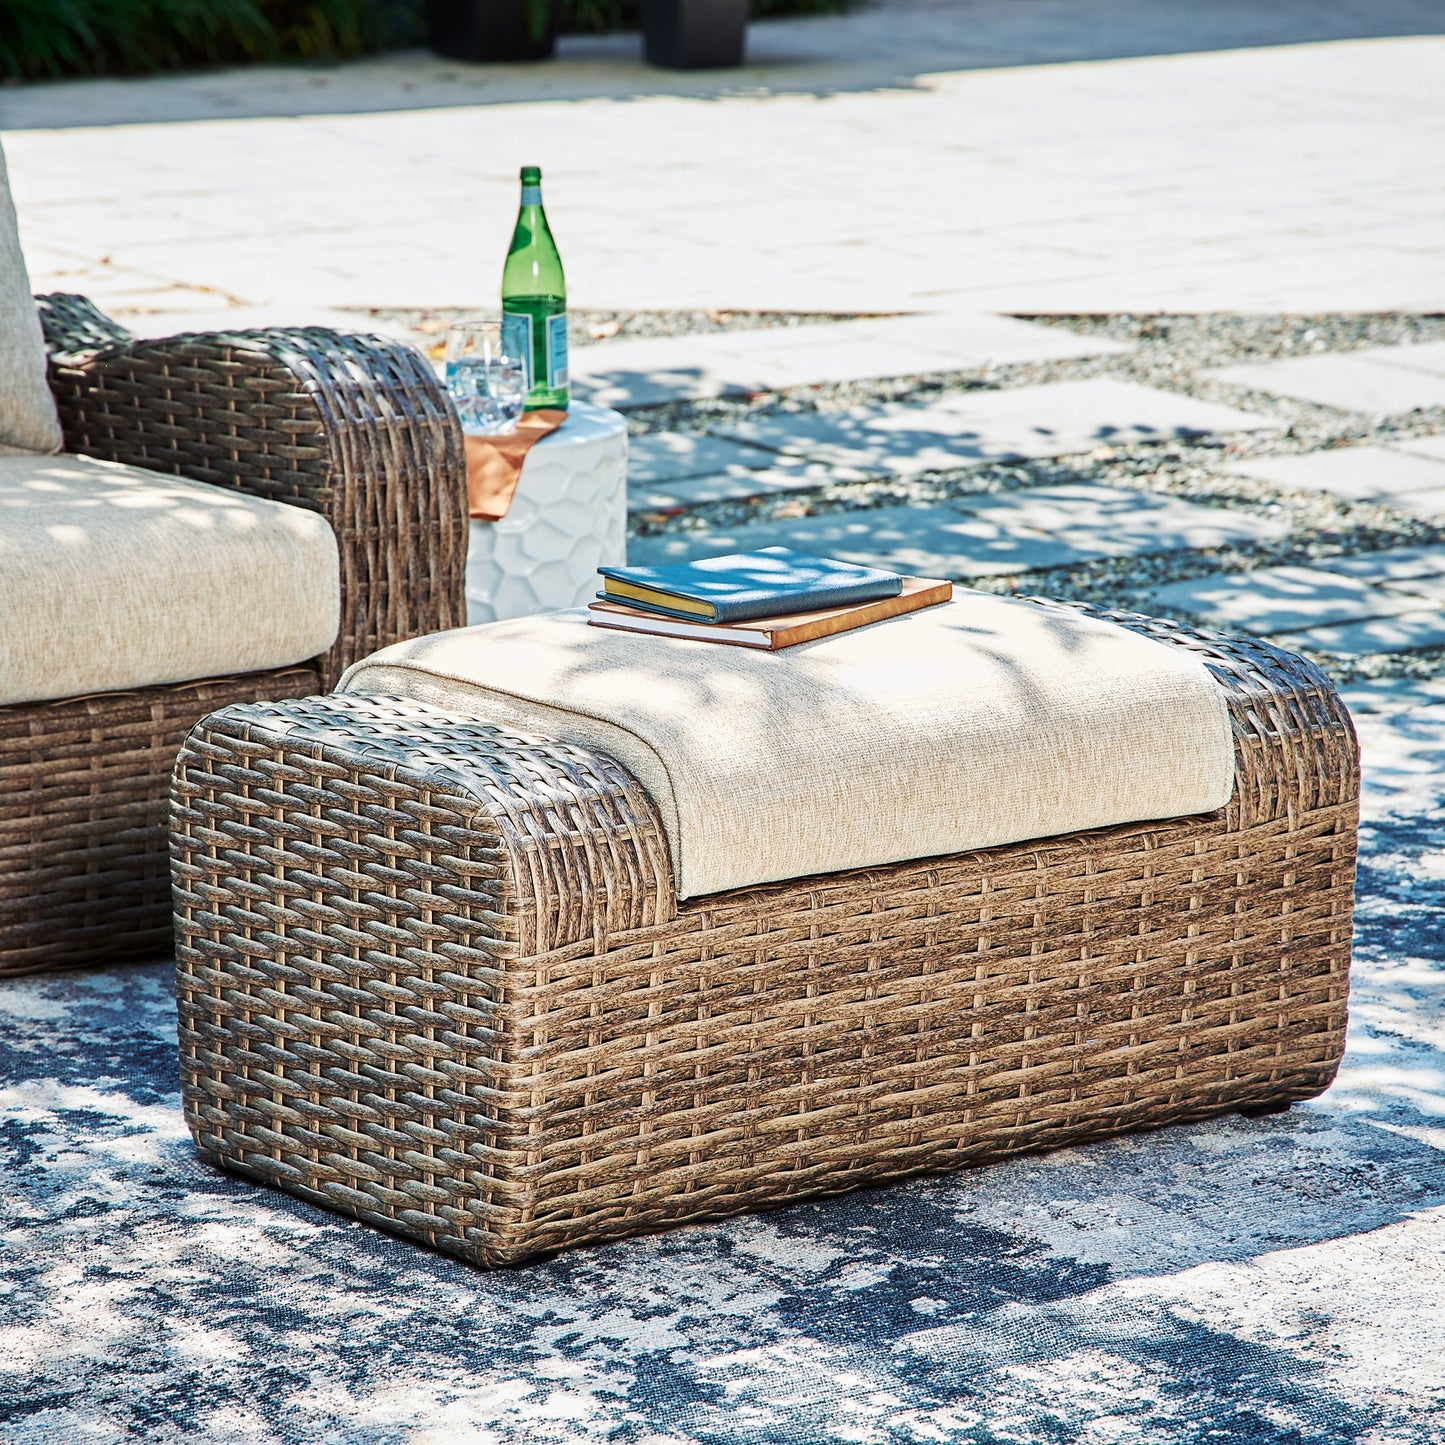 Sandy Bloom Outdoor Lounge Chair and Ottoman JB's Furniture  Home Furniture, Home Decor, Furniture Store